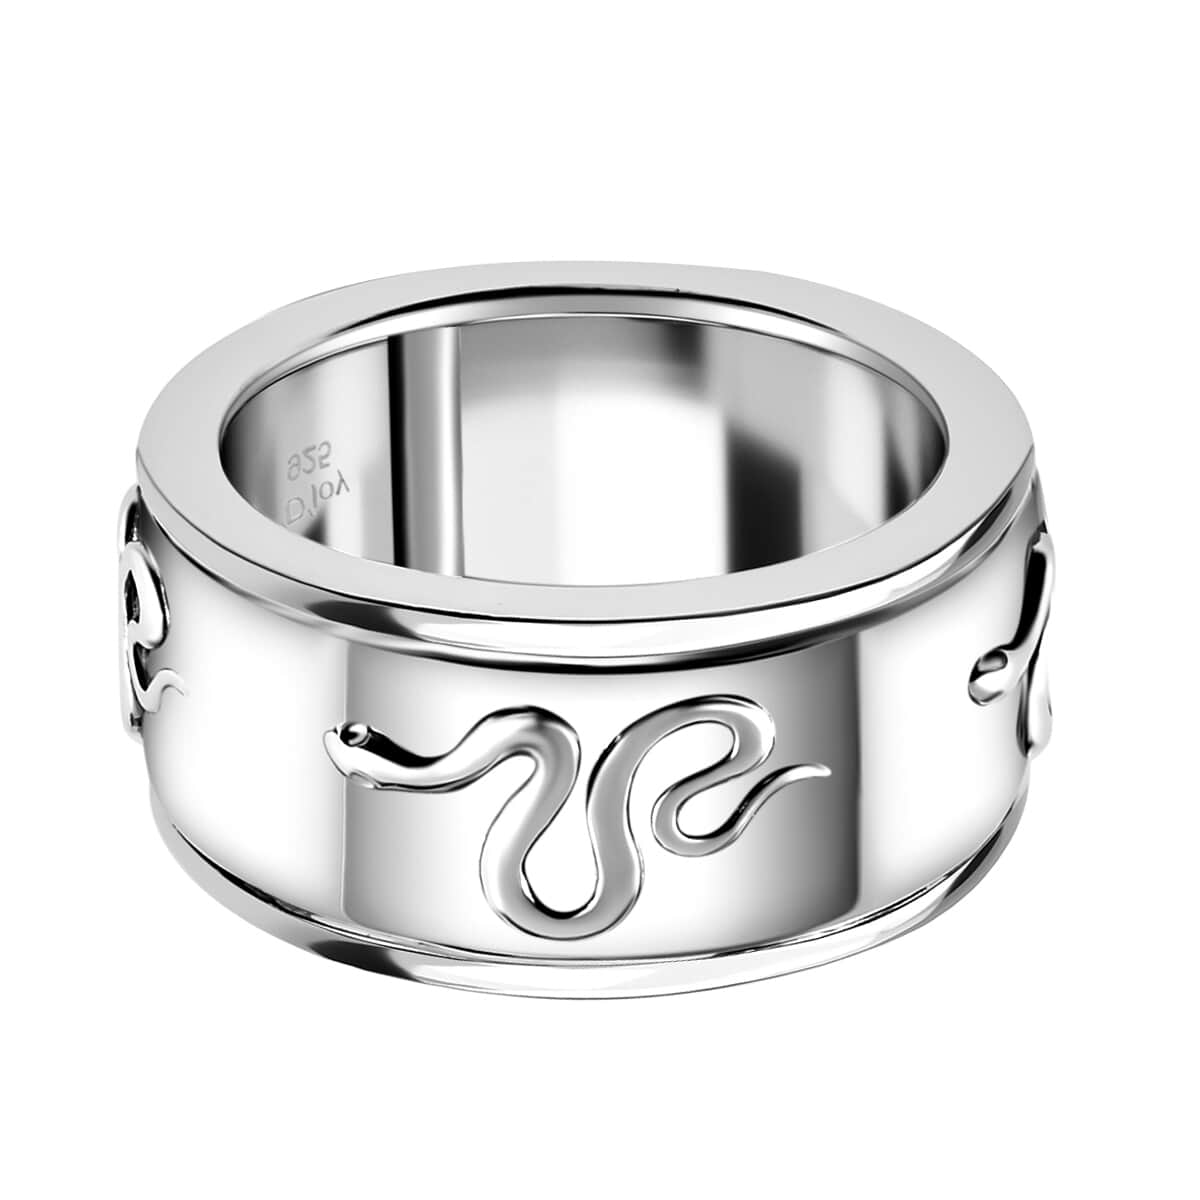 Sterling Silver Ring, Fidget Rings for Anxiety, Stress Relieving Anxiety Ring Band, Promise Rings 6 g (Size 7) image number 4